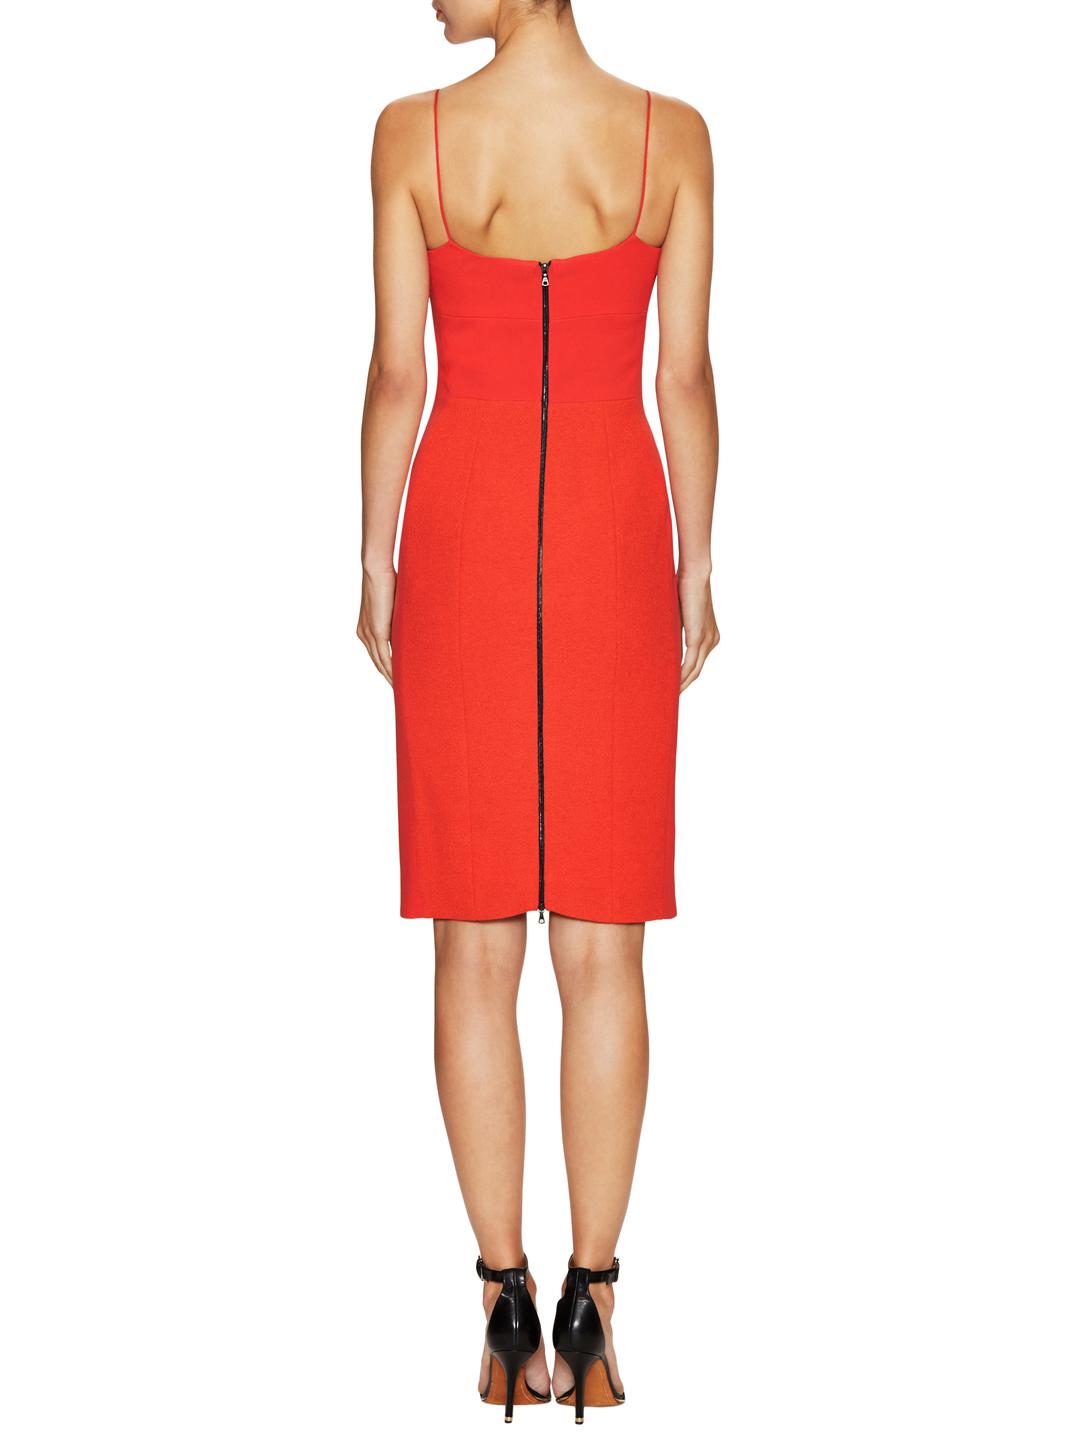 Narciso Rodriguez Wool Bustier Dress in ...